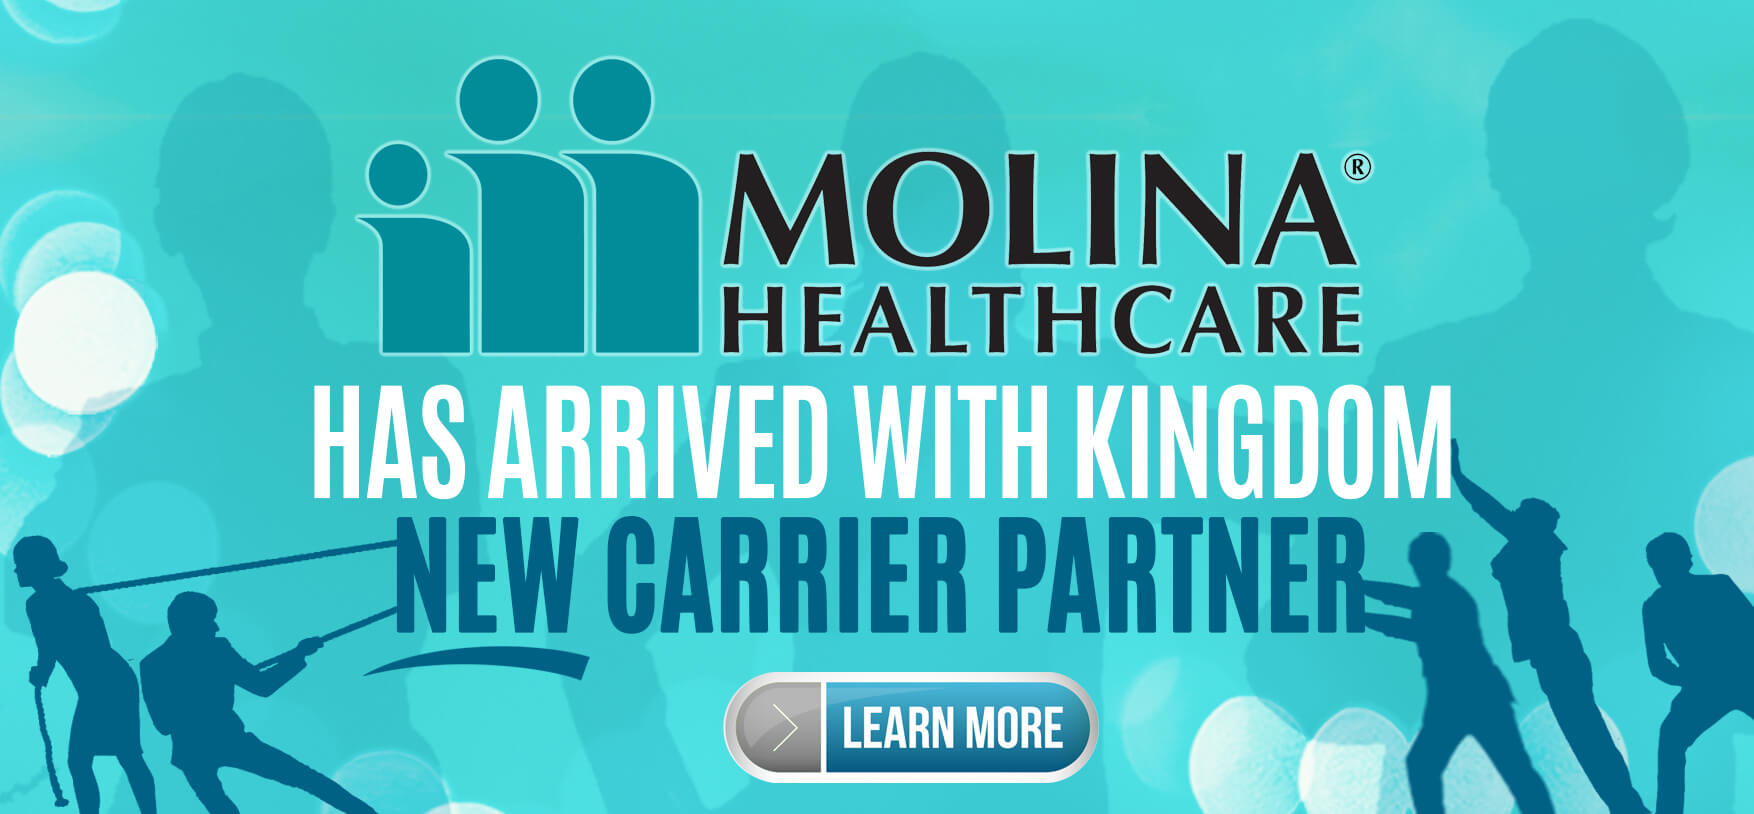 Molina Healthcare has arrived!